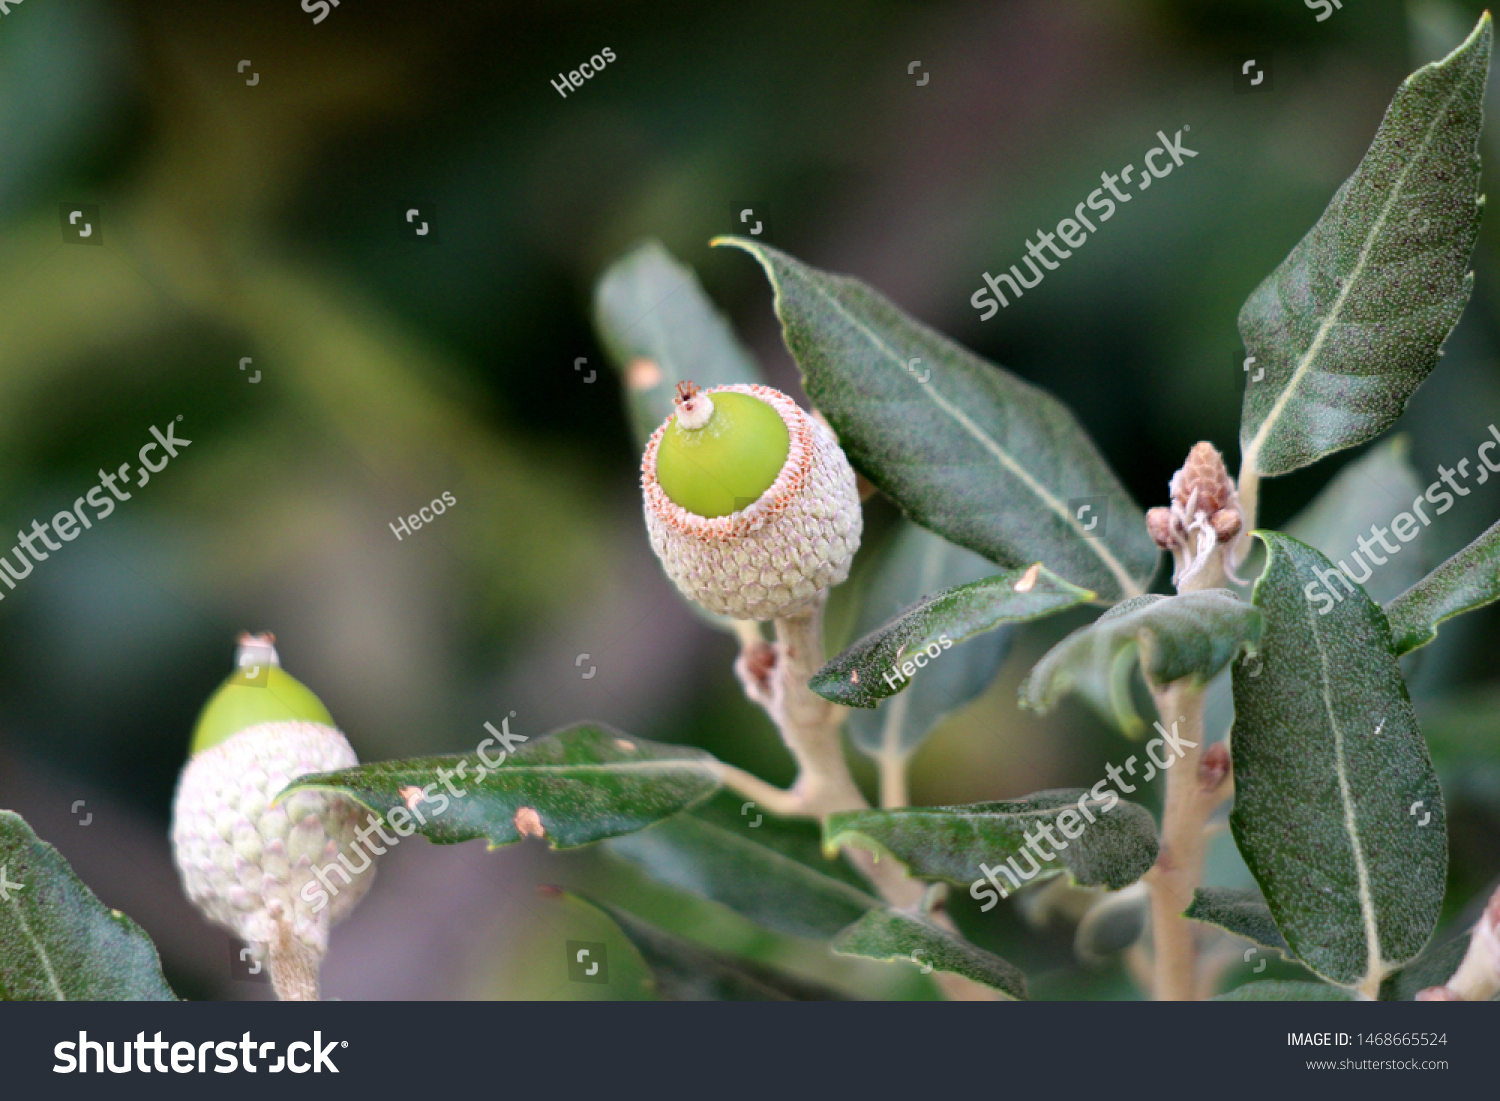 Evergreen oak or Quercus ilex or Holly oak or Holm oak evergreen oak tree branch with young light green shoots clothed with a close grey felt surrounded with dark green leathery leaves #1468665524